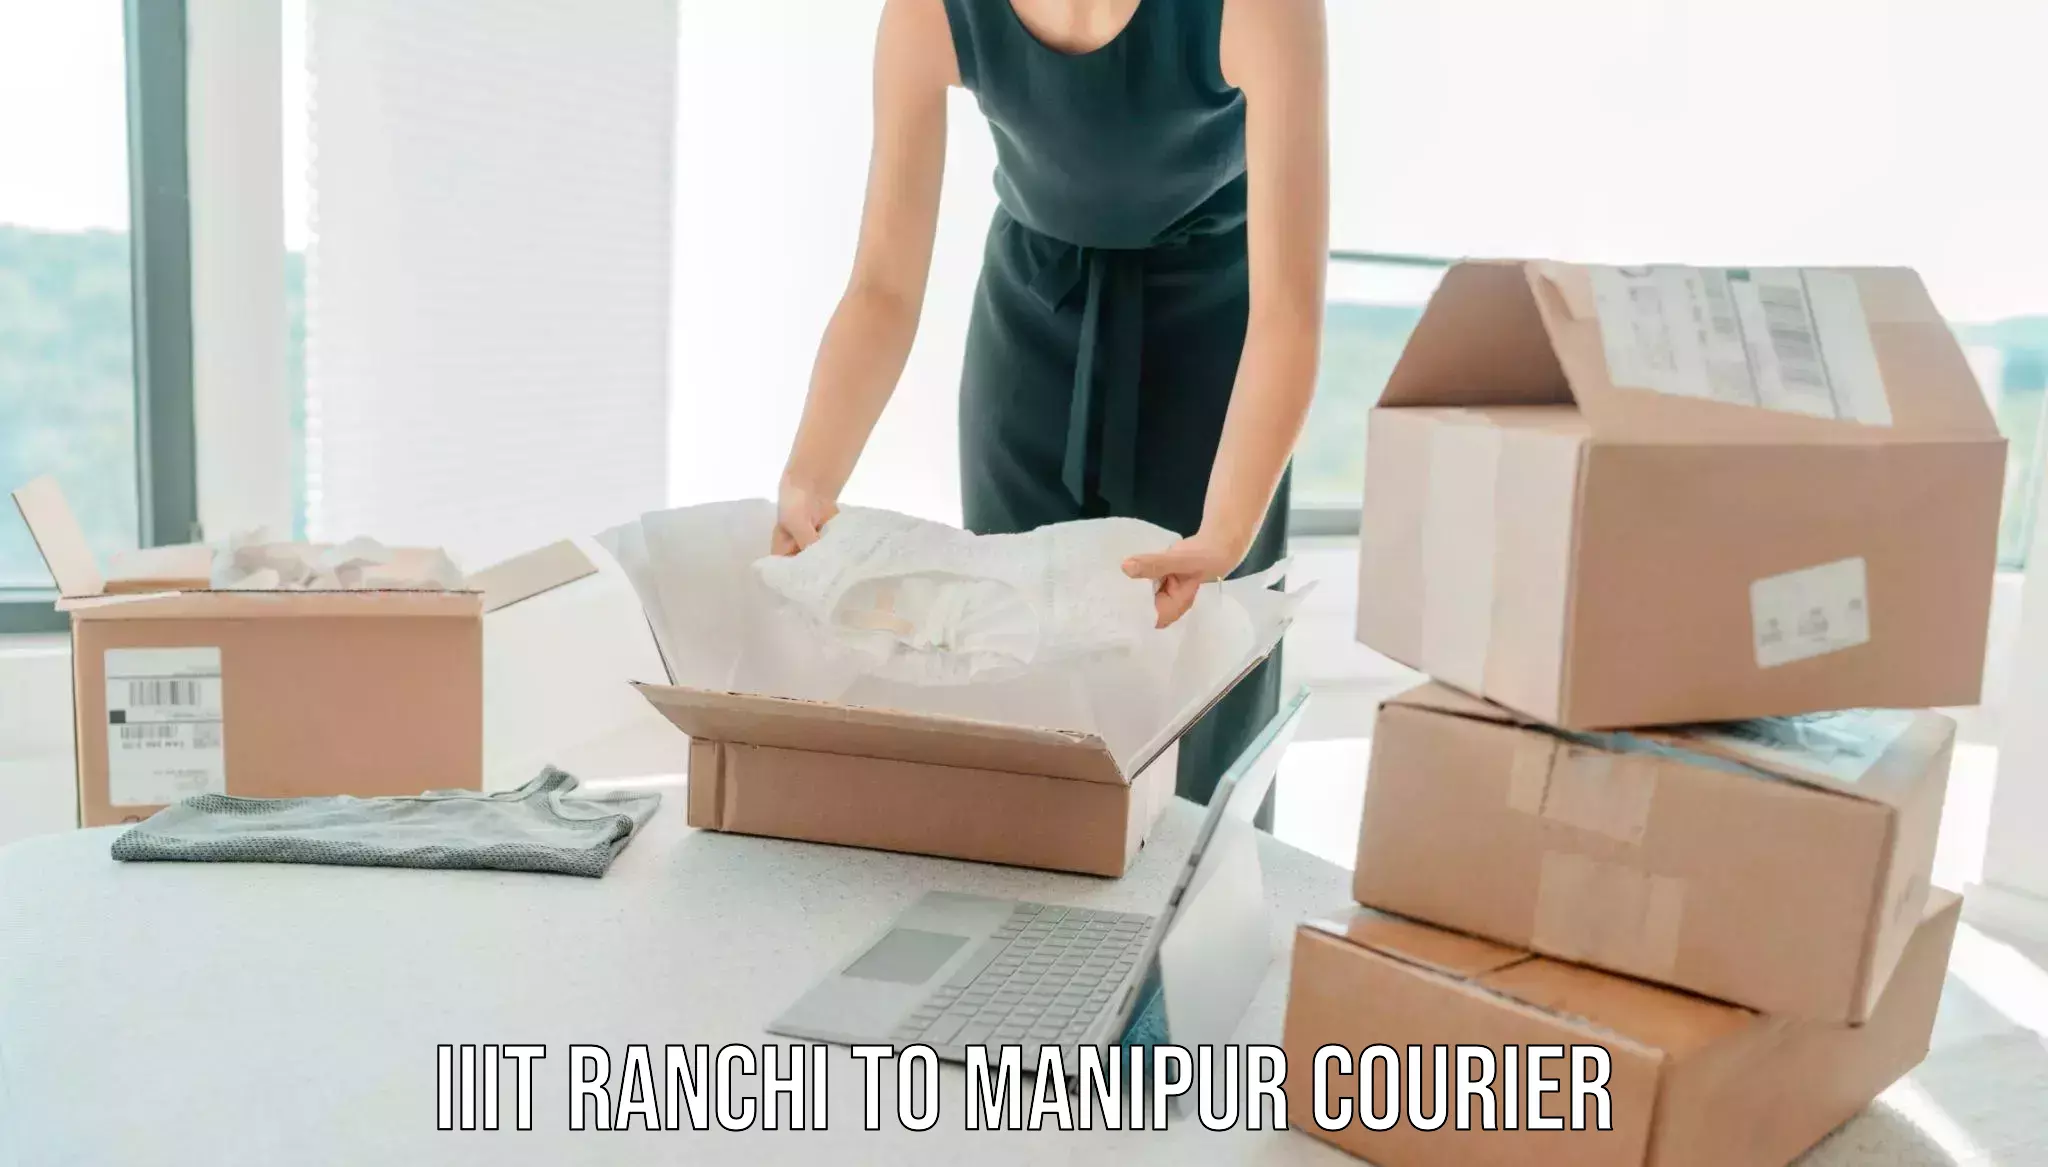 Household goods transport service IIIT Ranchi to Imphal